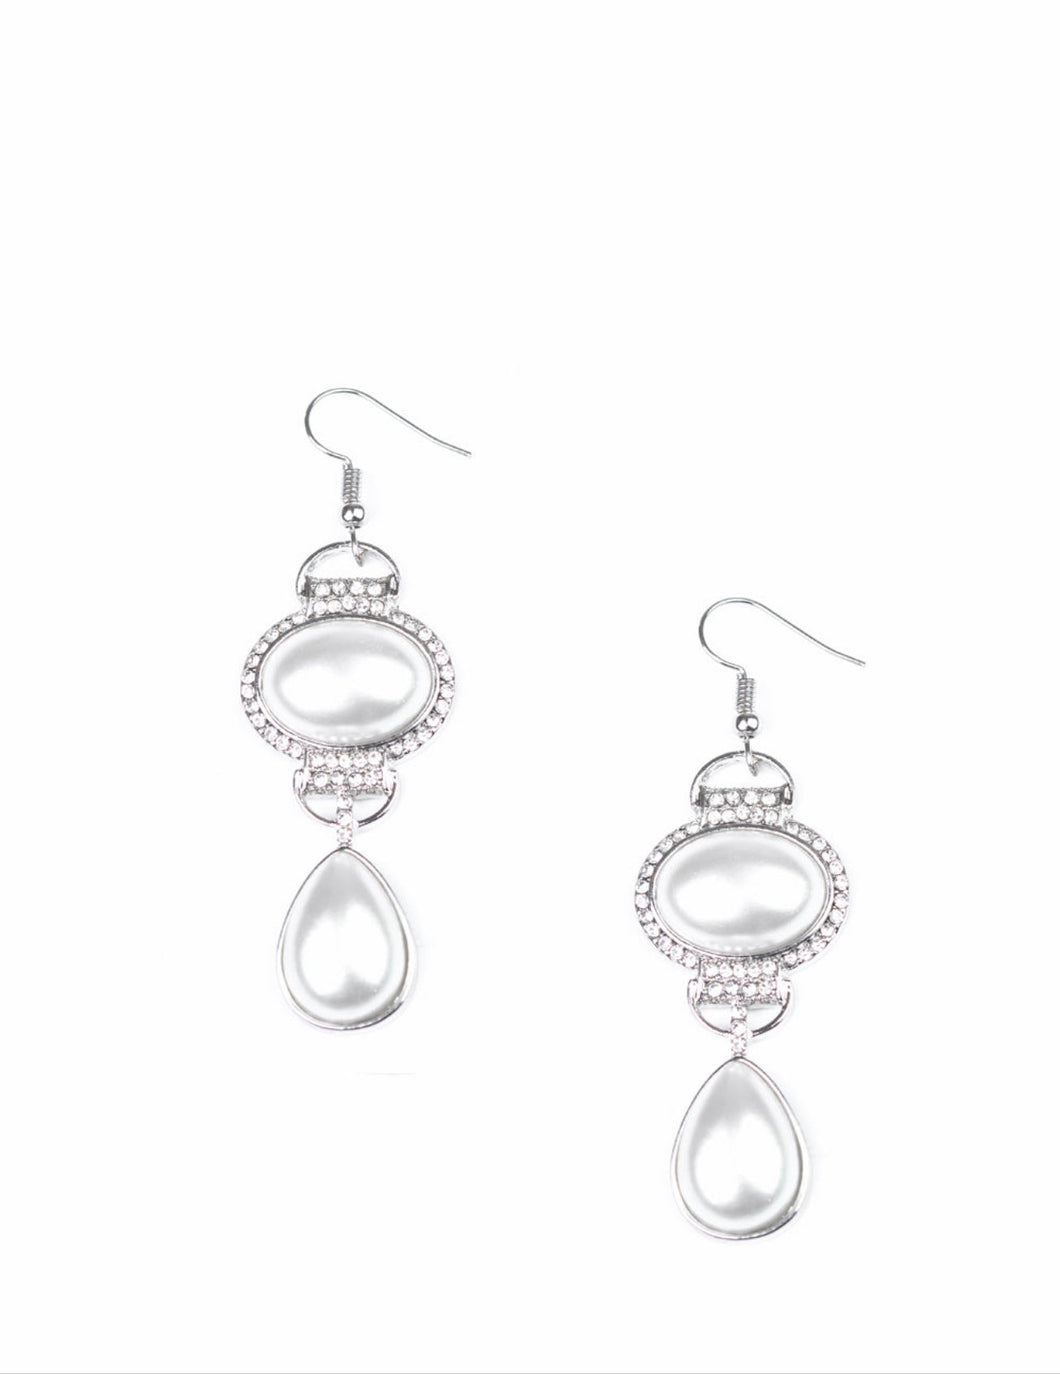 Icy Shimmer White Pearl and Bling Earrings